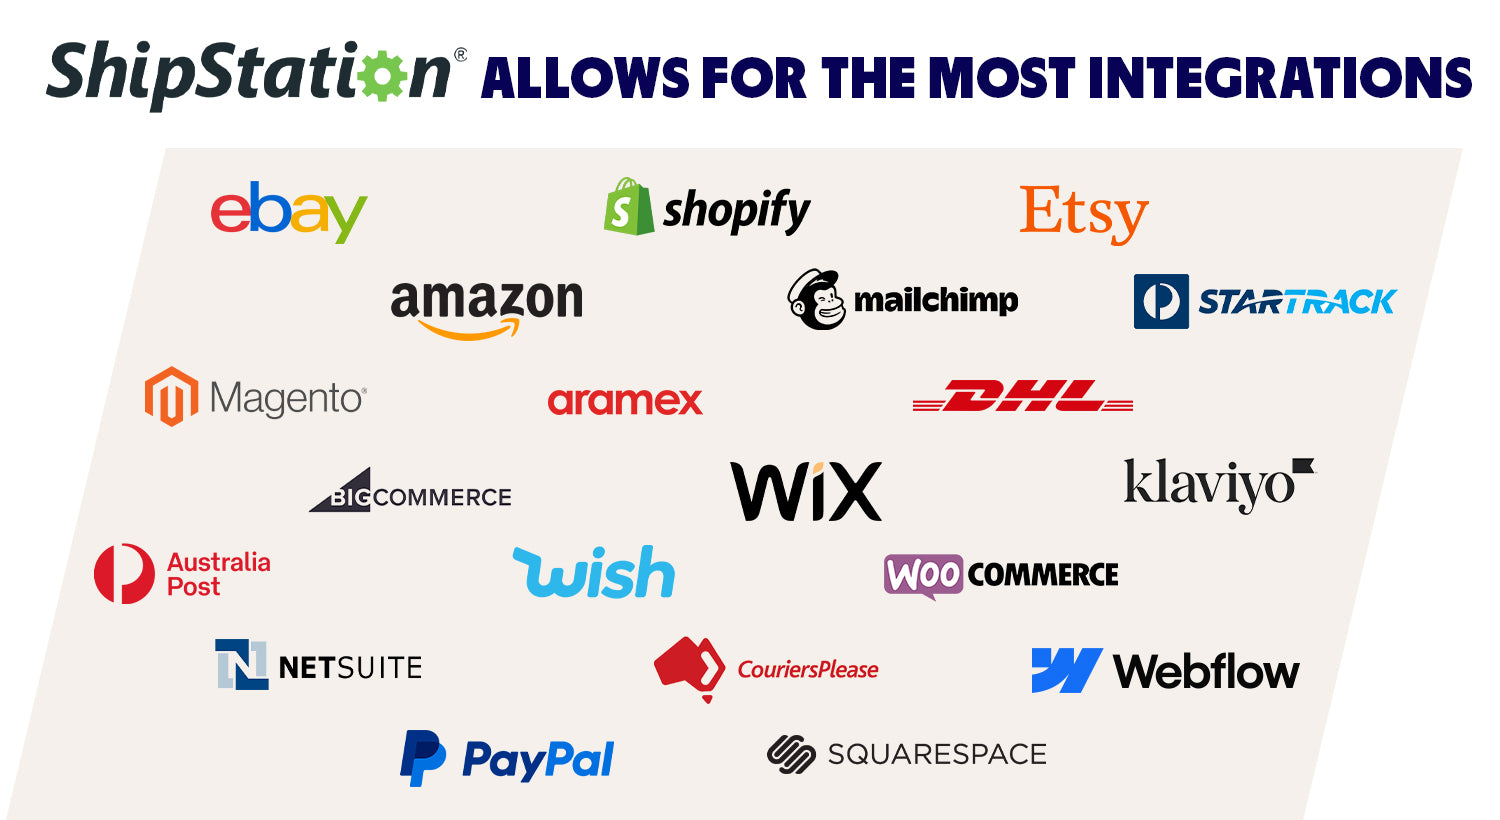 ShipStation allows for a wide array of integrations including eBay, Shopify, Amazon, StarTrack, Mailchimp, Squarespace and PayPal.